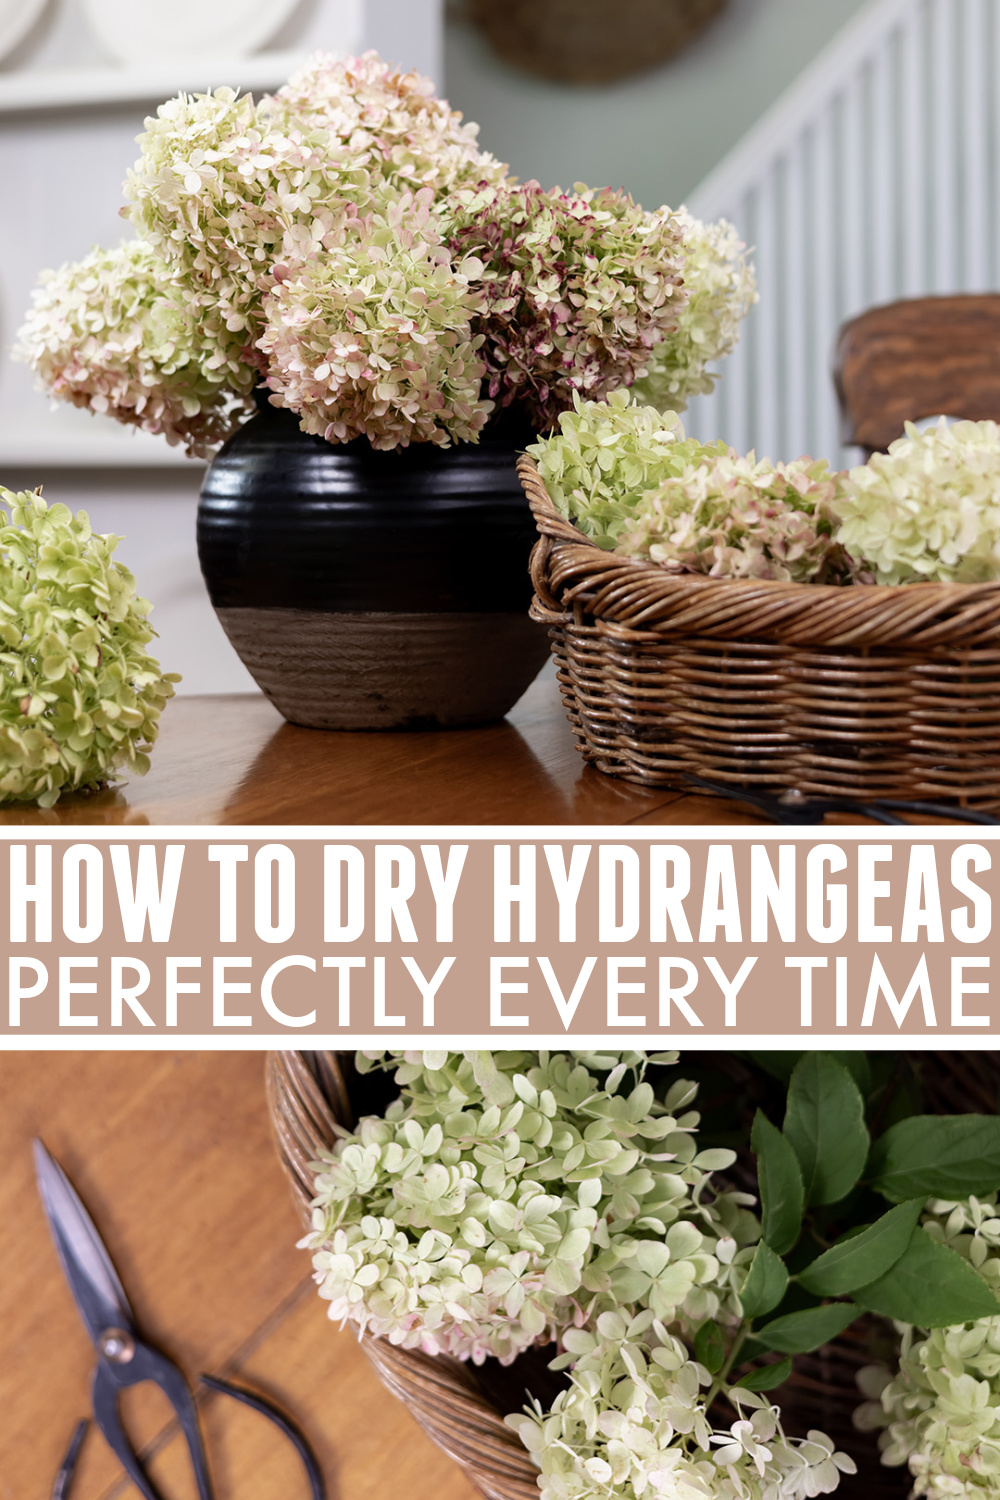 Main Pinterest Image for hydrangea drying instructions